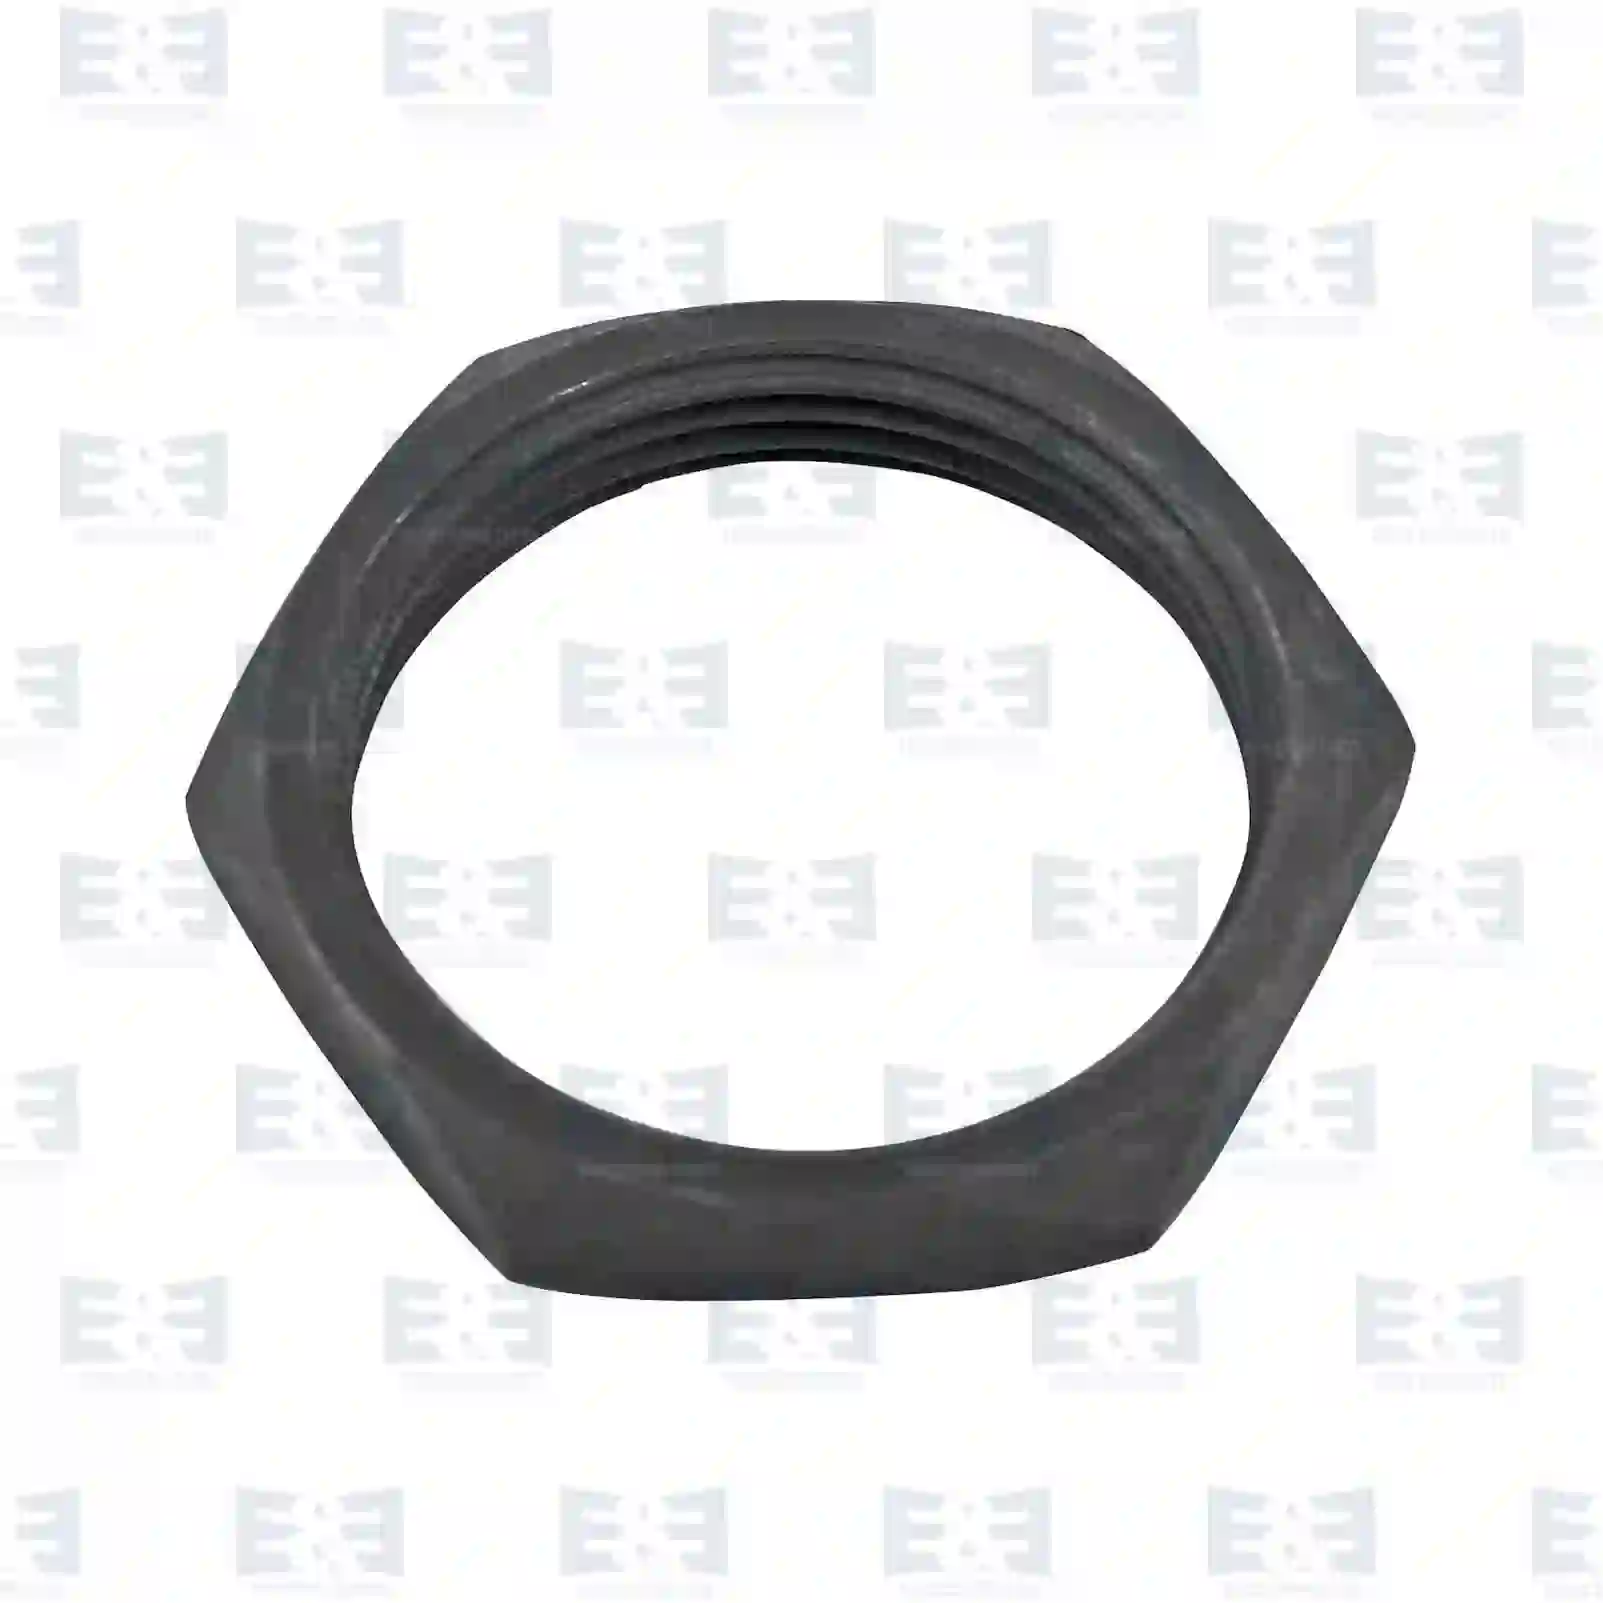 Differential Lock Lock nut, EE No 2E2270439 ,  oem no:3839900051, , E&E Truck Spare Parts | Truck Spare Parts, Auotomotive Spare Parts